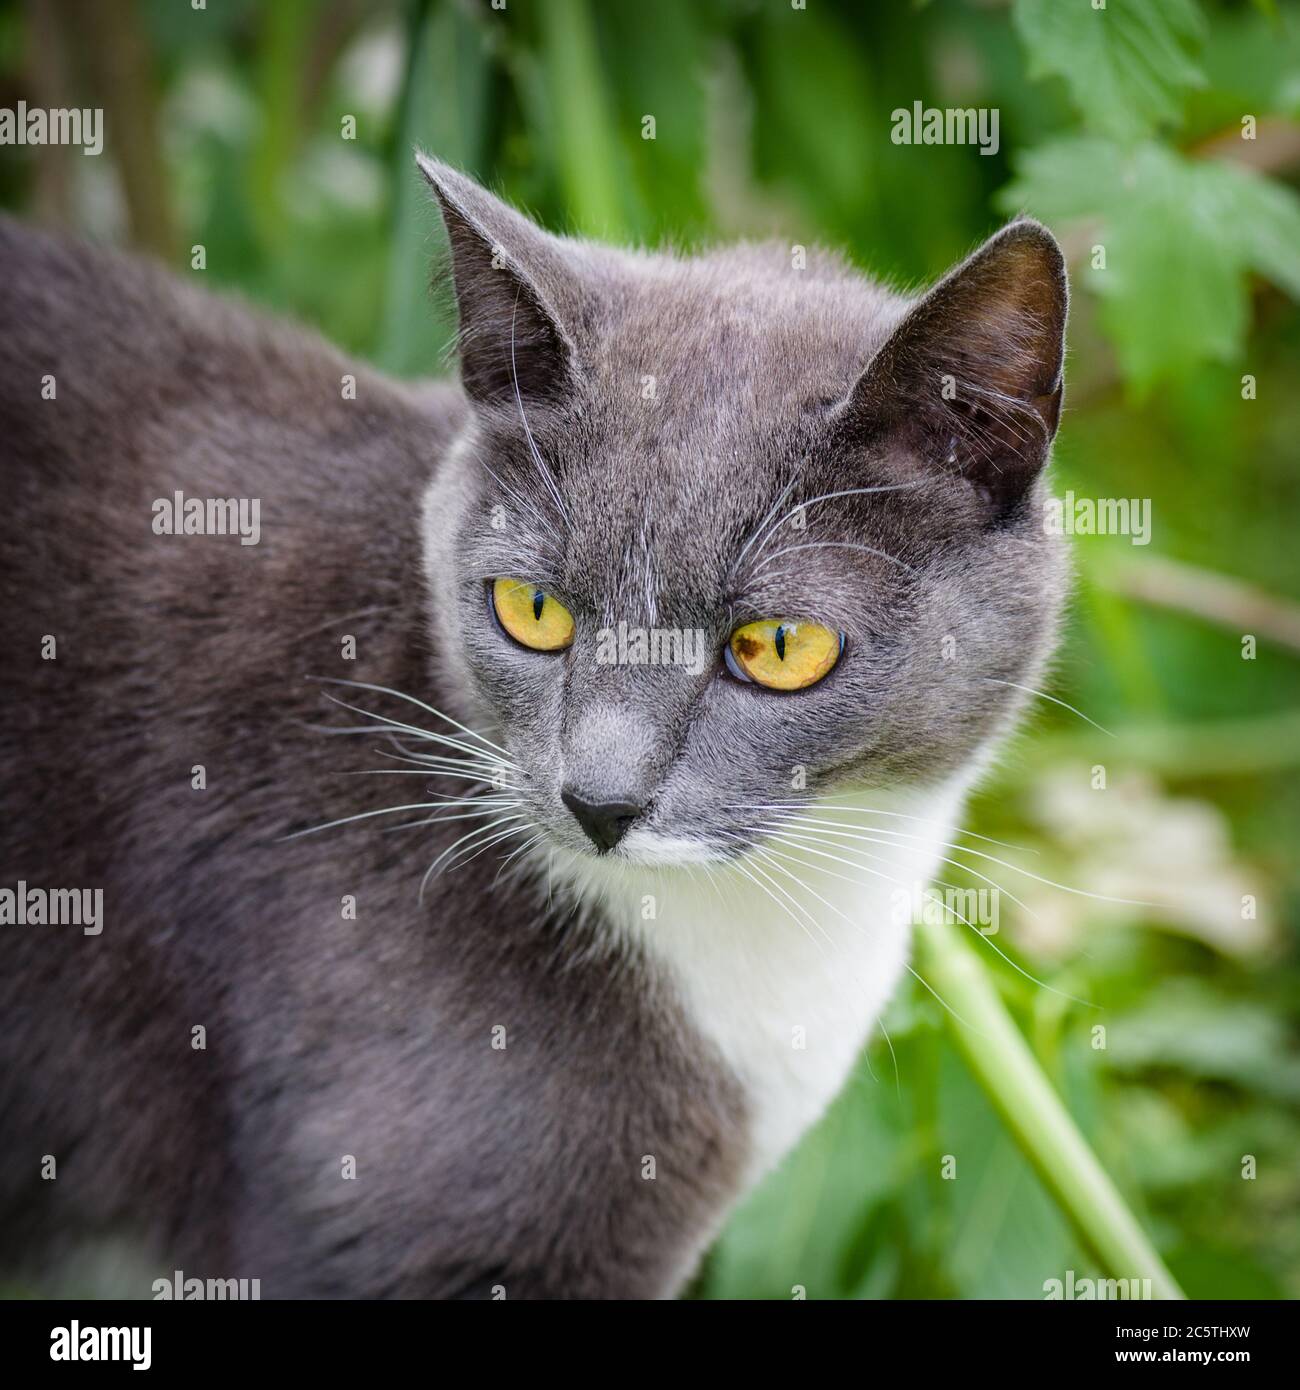 A gray-blooded gray cat, with yellow eyes, sits and looks out into the distance, on a green background close-up. Stock Photo